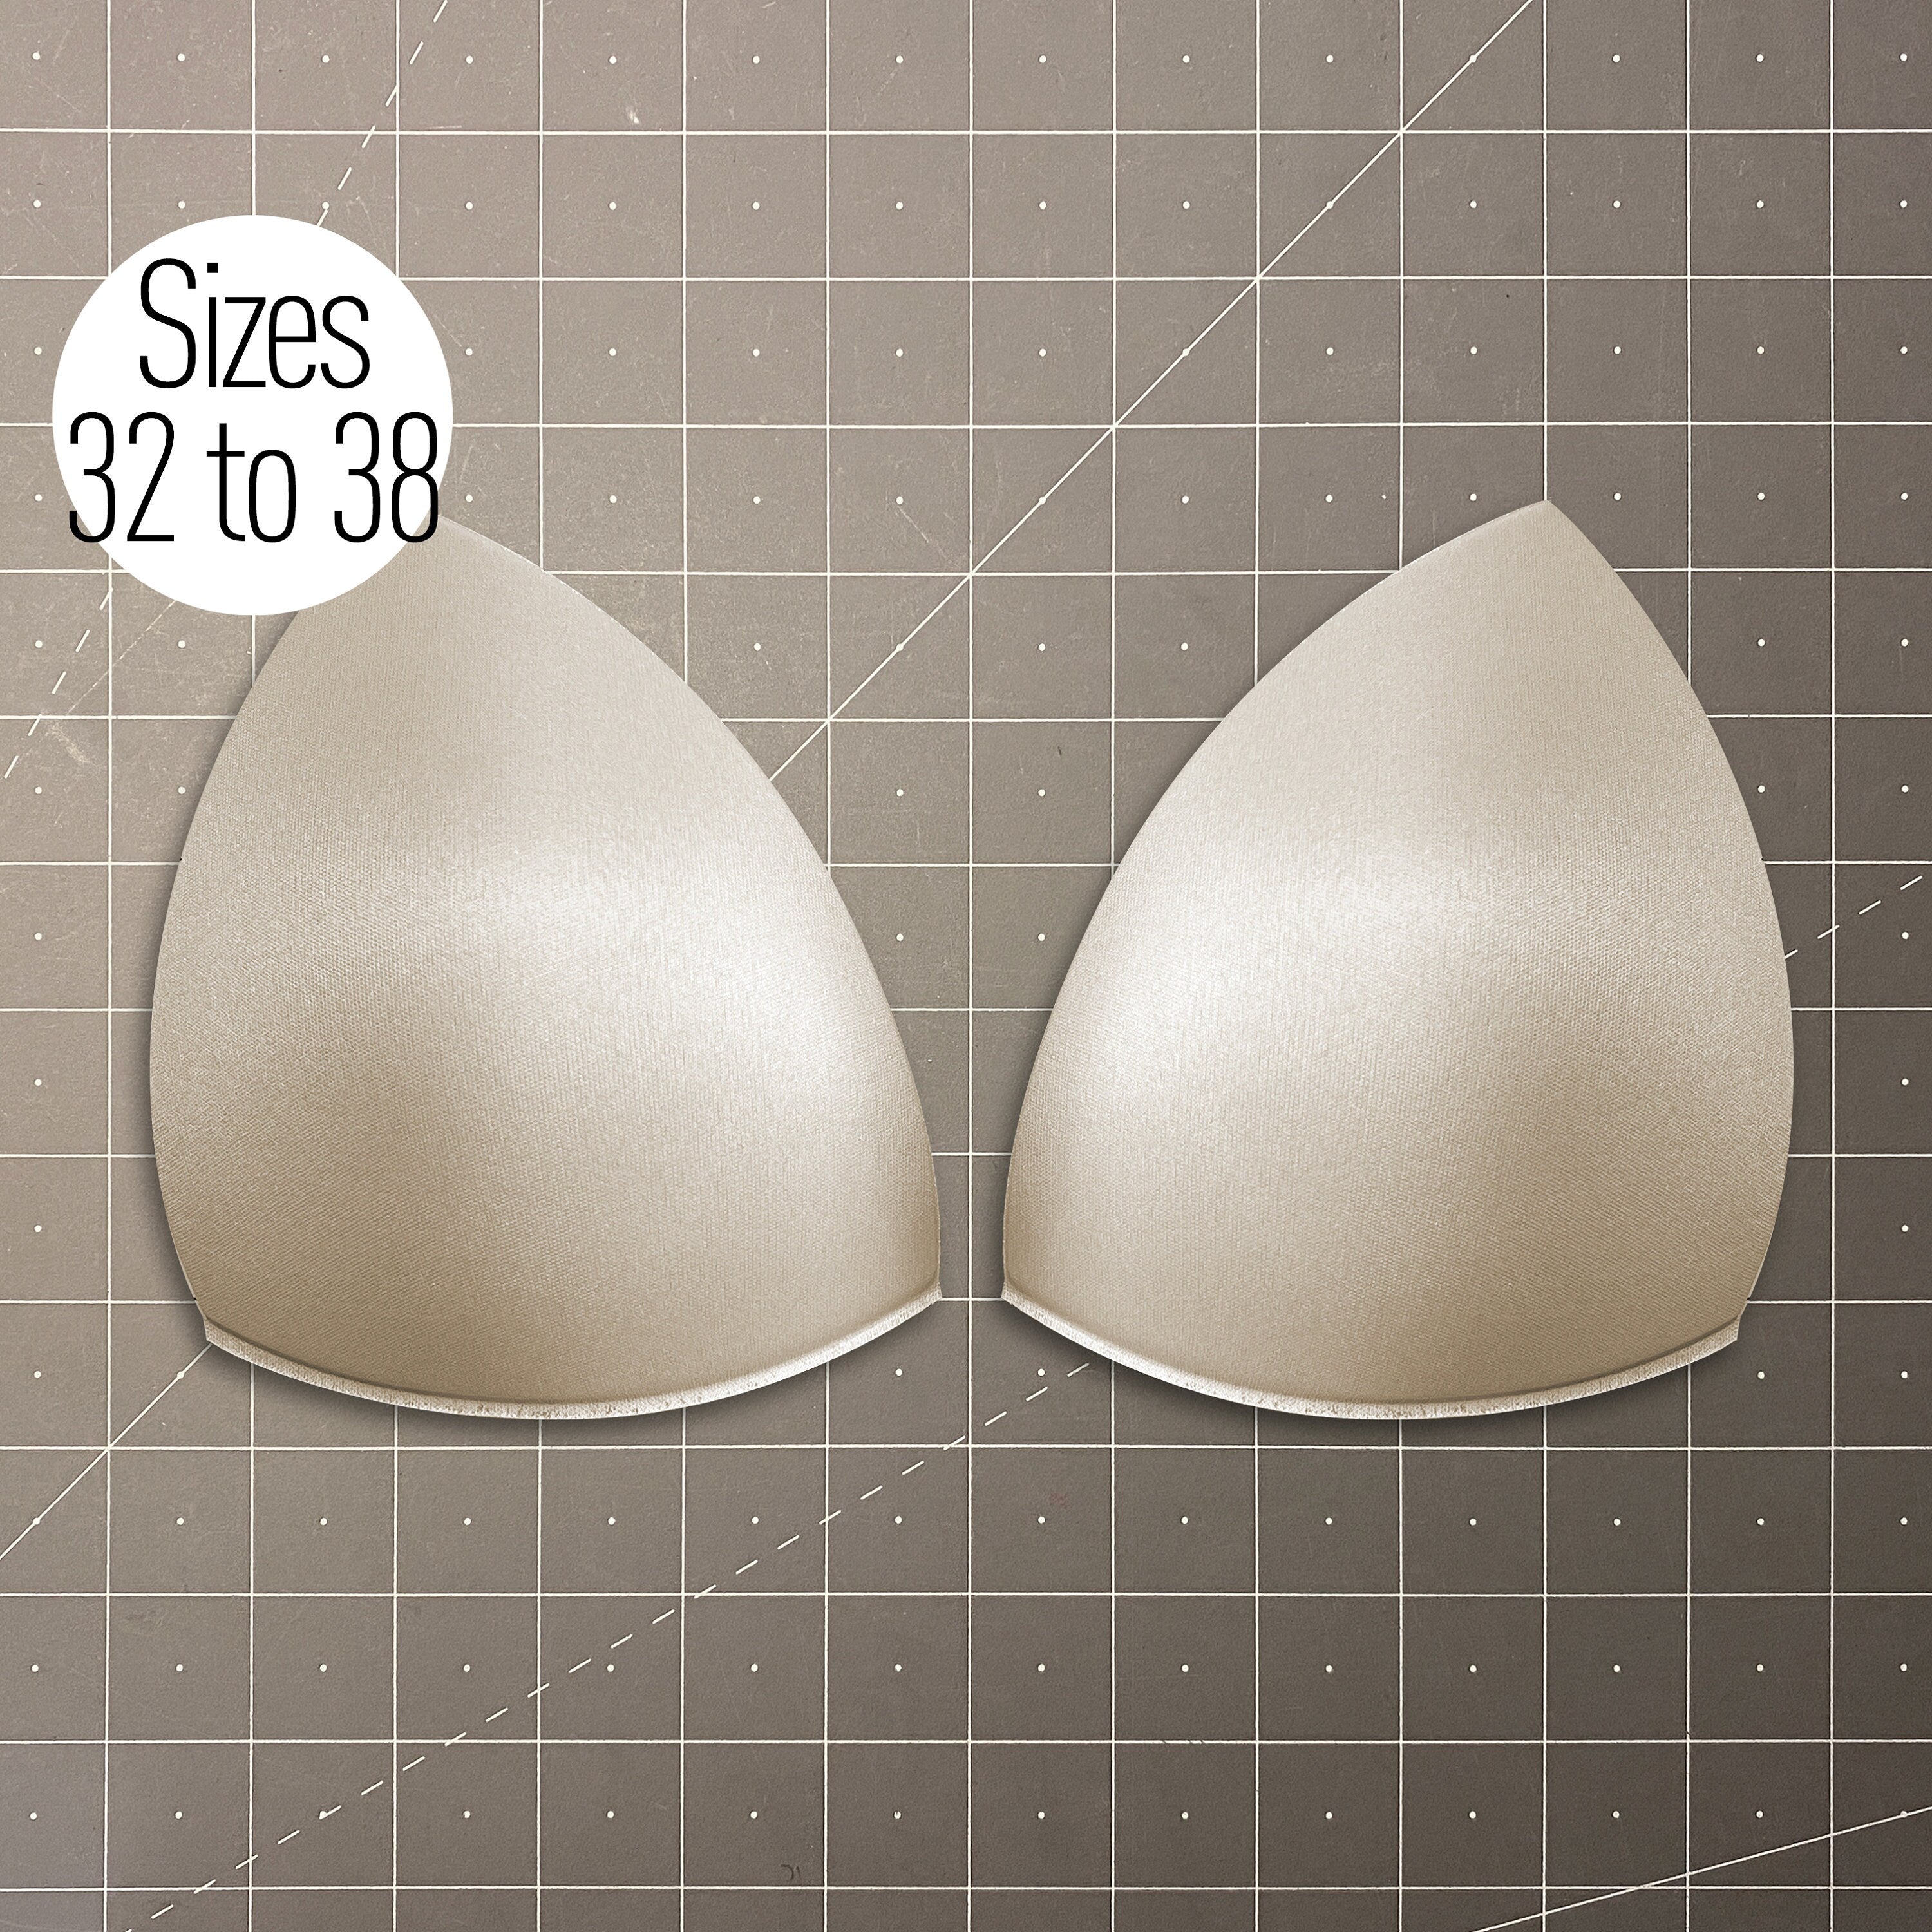 Push Up Triangular Shaped Style 2, Bra Cups or Sewn In for